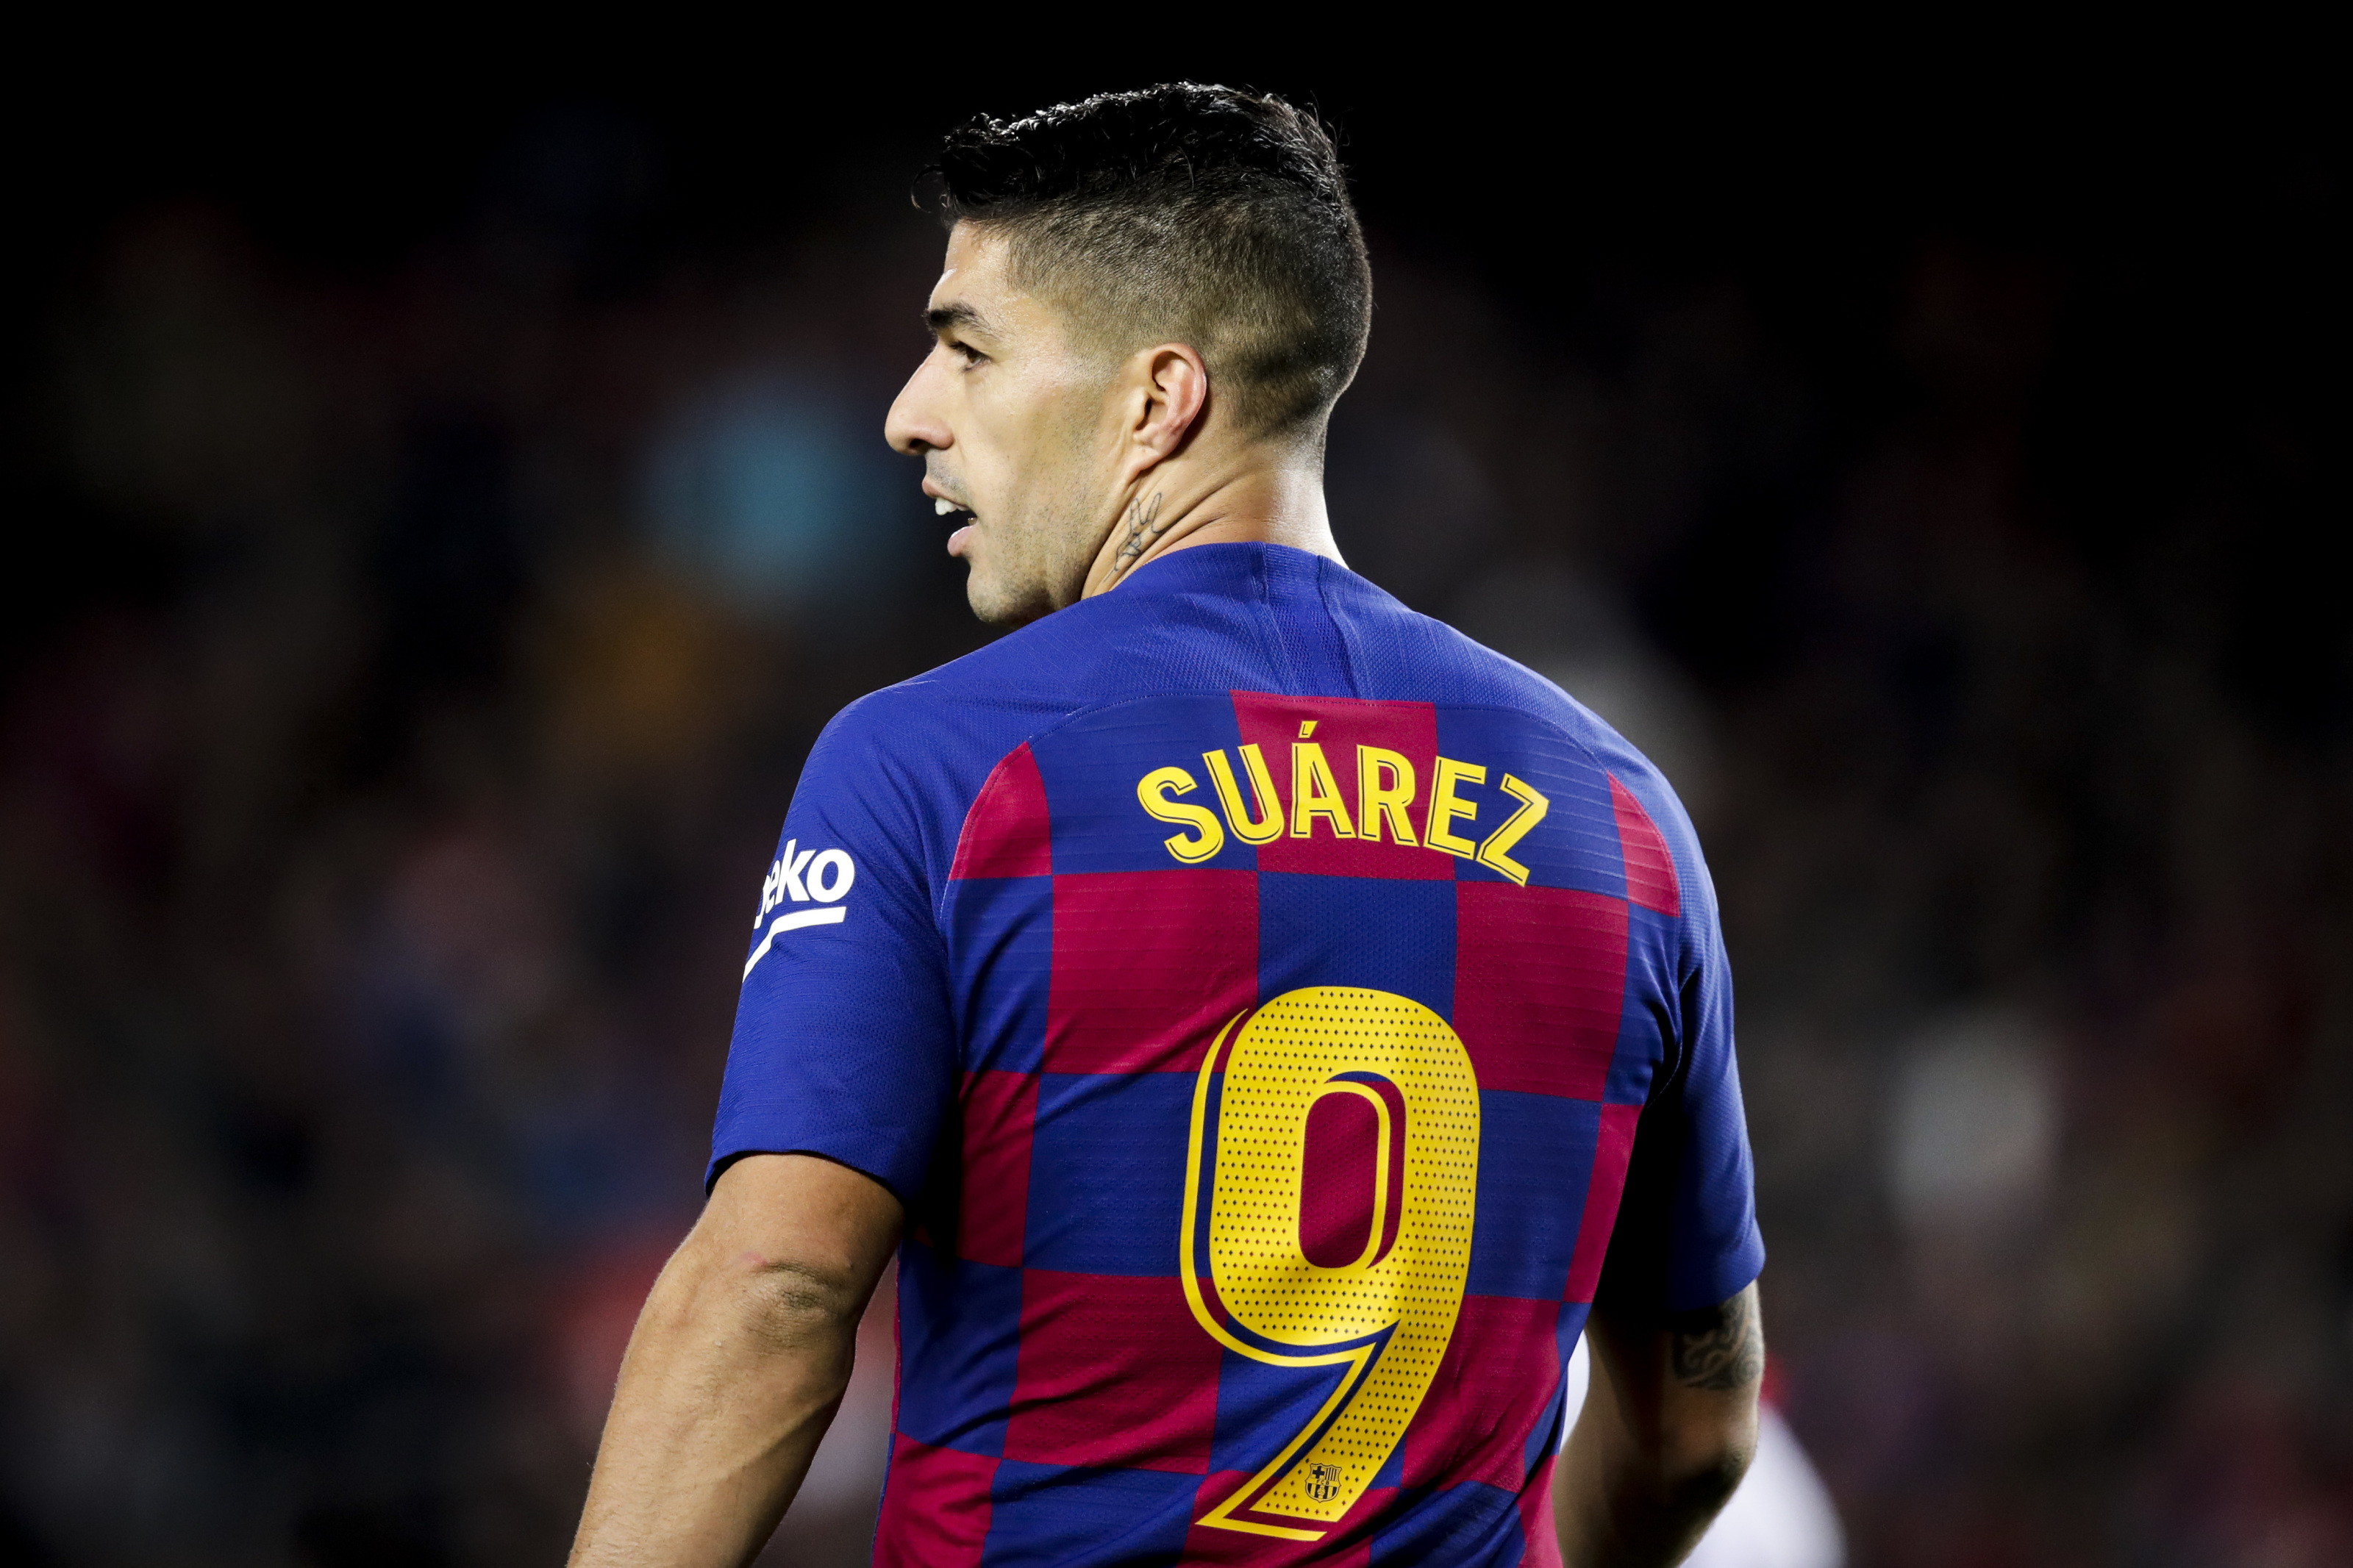 Luis Suarez opens up about being kicked out of Barcelona